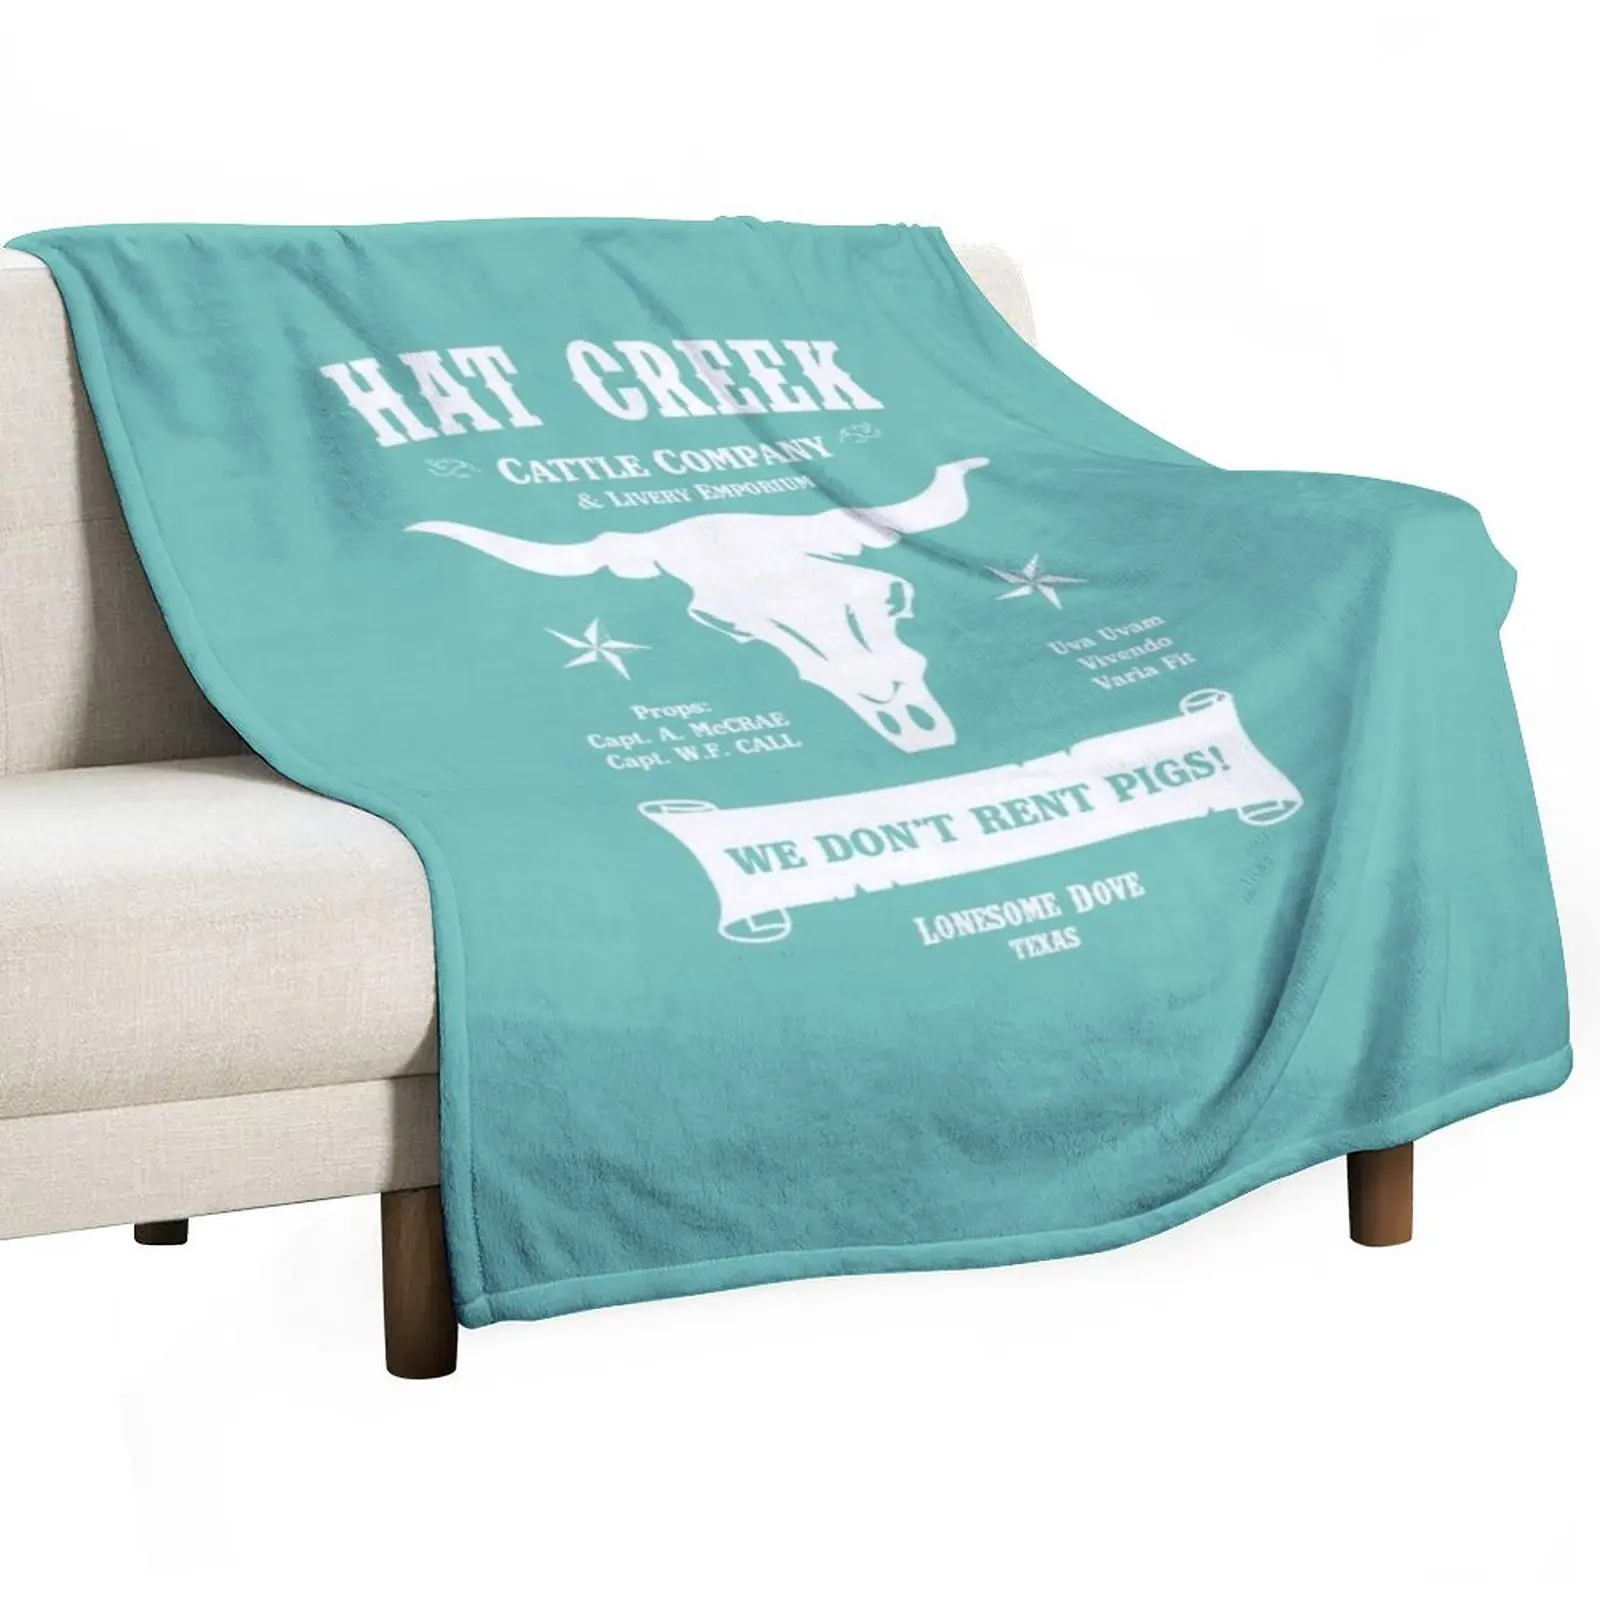 

Hat Creek Cattle Company Lonesome Dove Throw Blanket Fluffys Large Fashion Sofas Winter beds Blankets